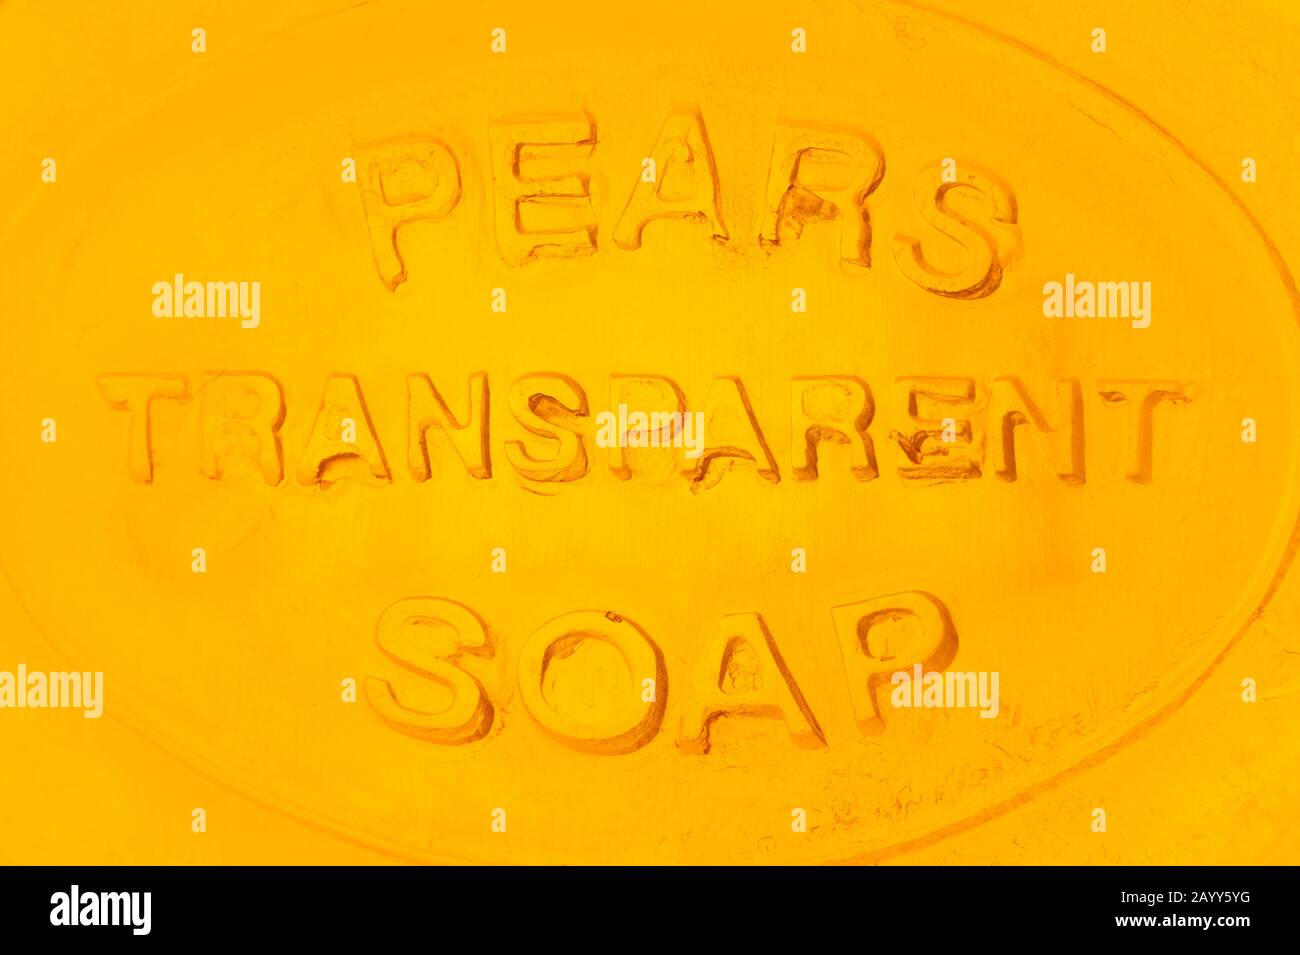 A close up of a bar of Pears Transparent Soap. Stock Photo